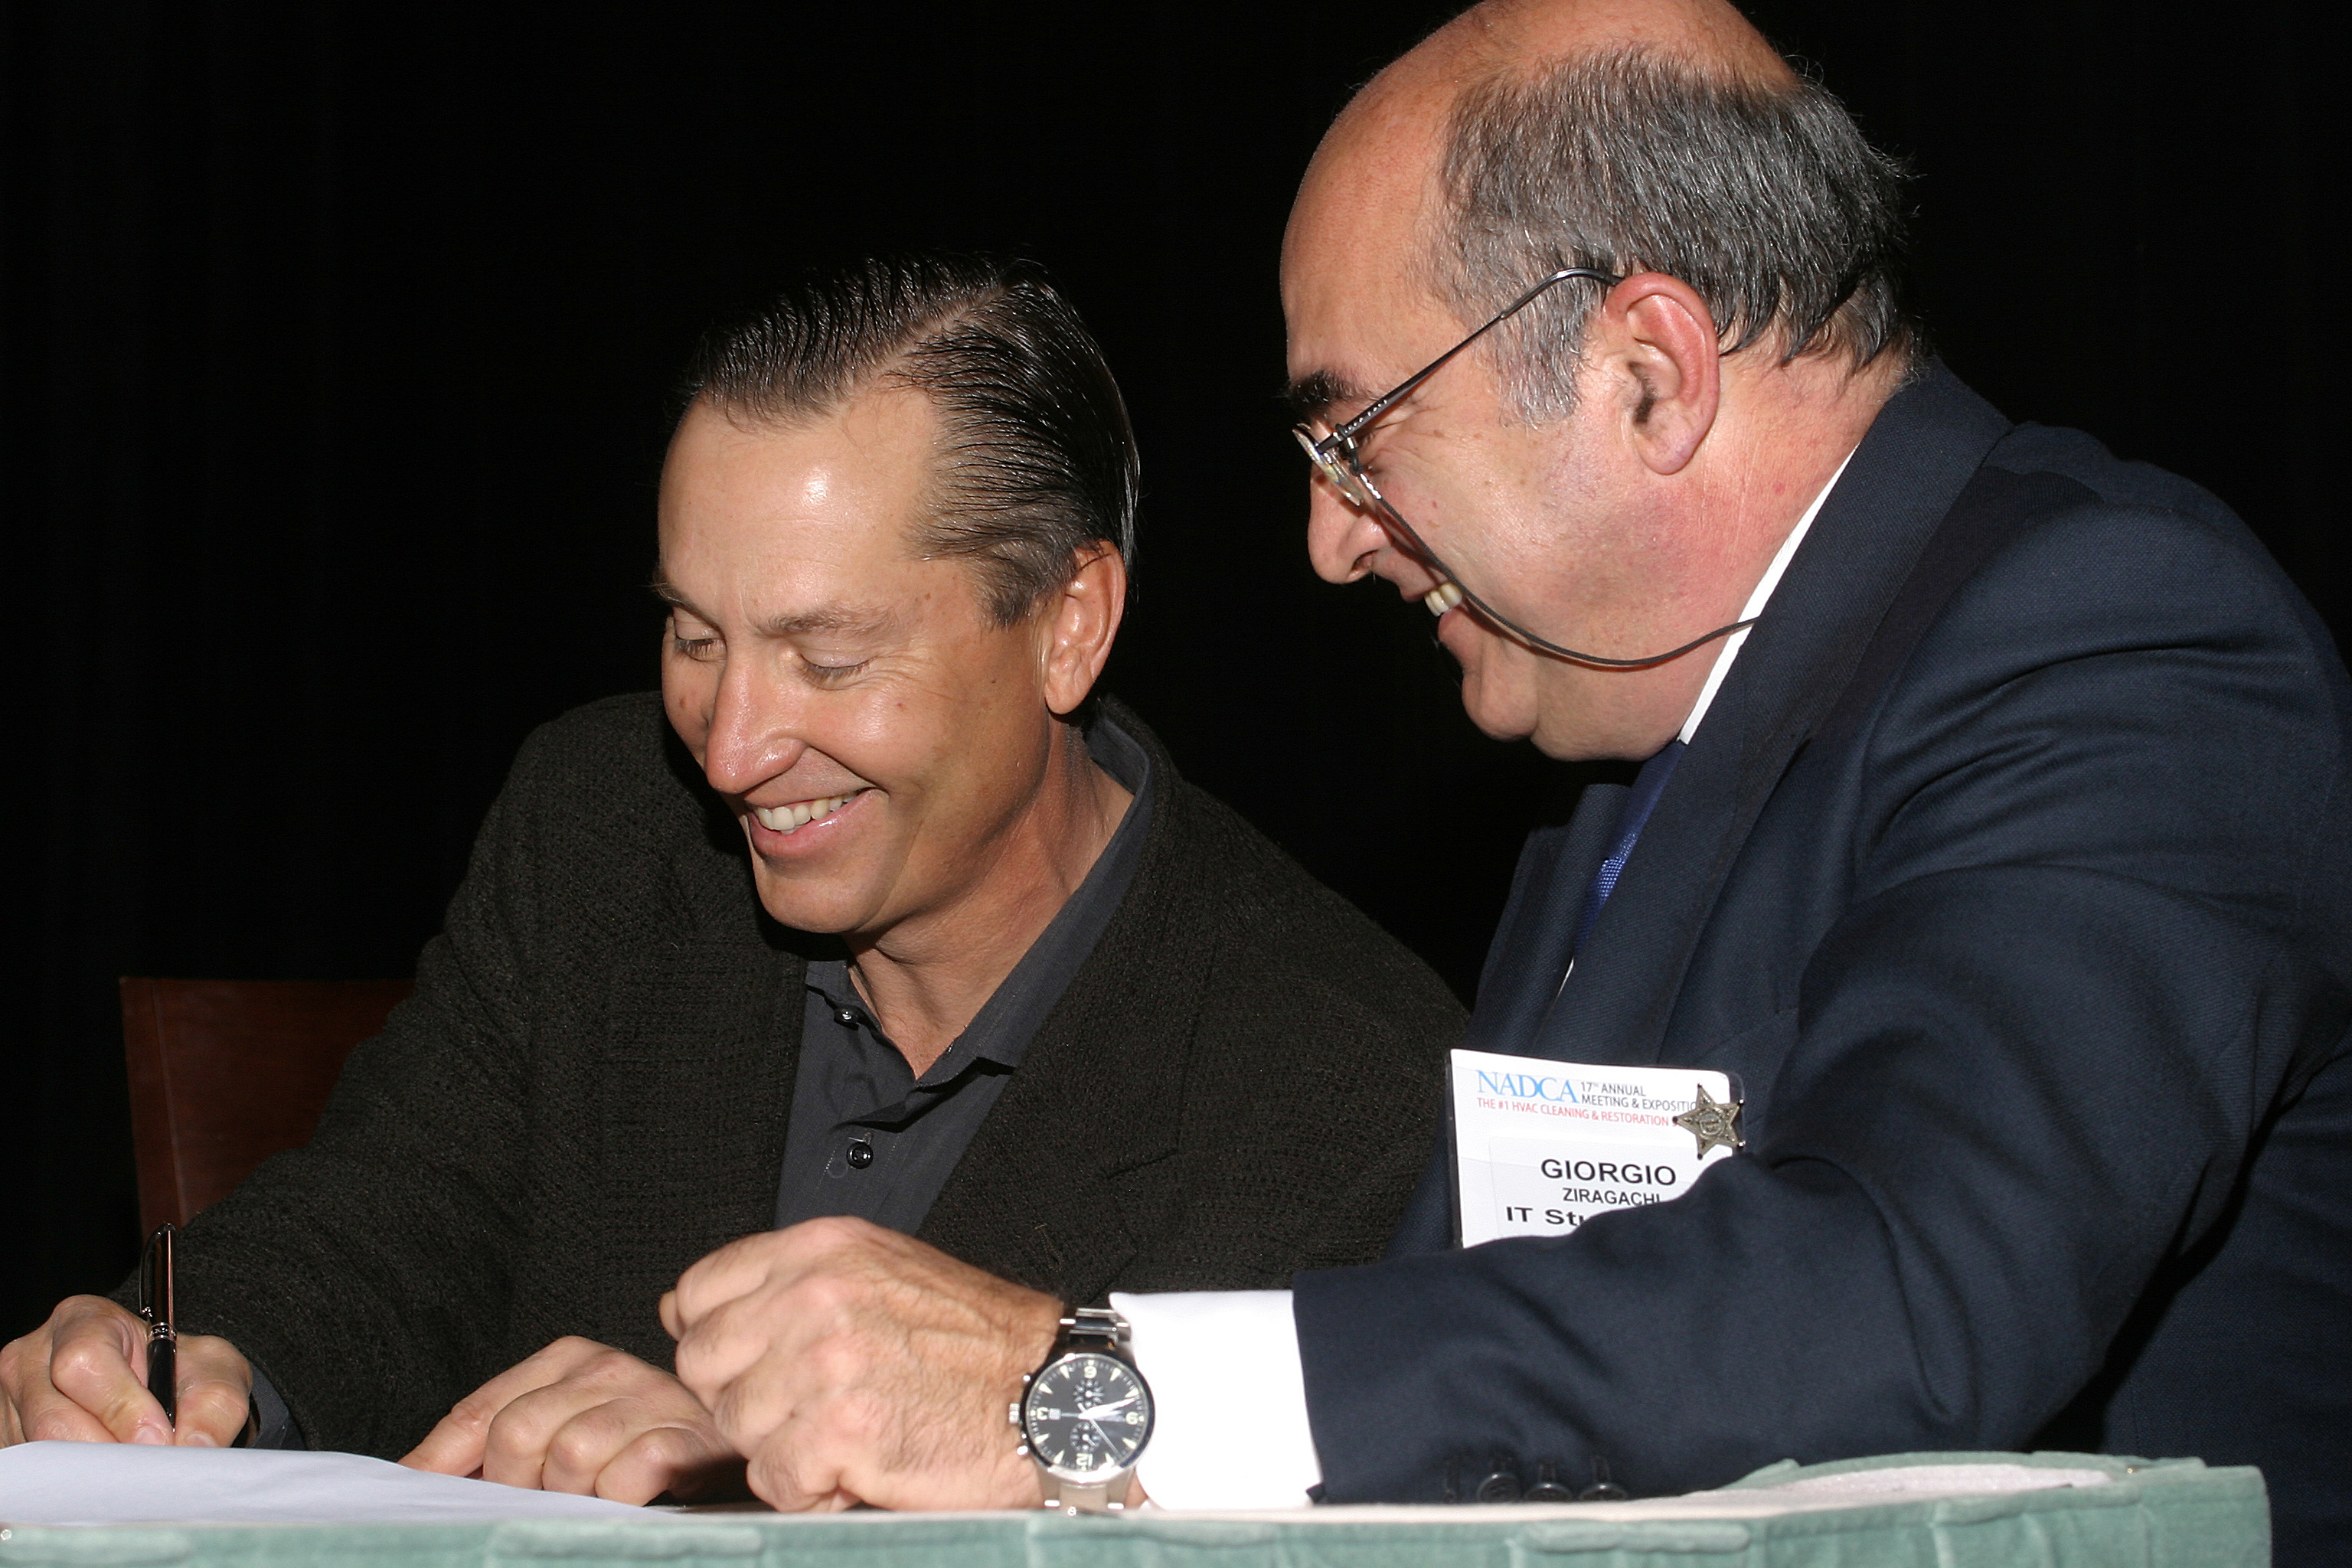 Past NADCA president Bill Lundquist and past AIISA president, Giorgio Ziragachi signing the official partnership agreement on March 8, 2006, in Dallas, TX.